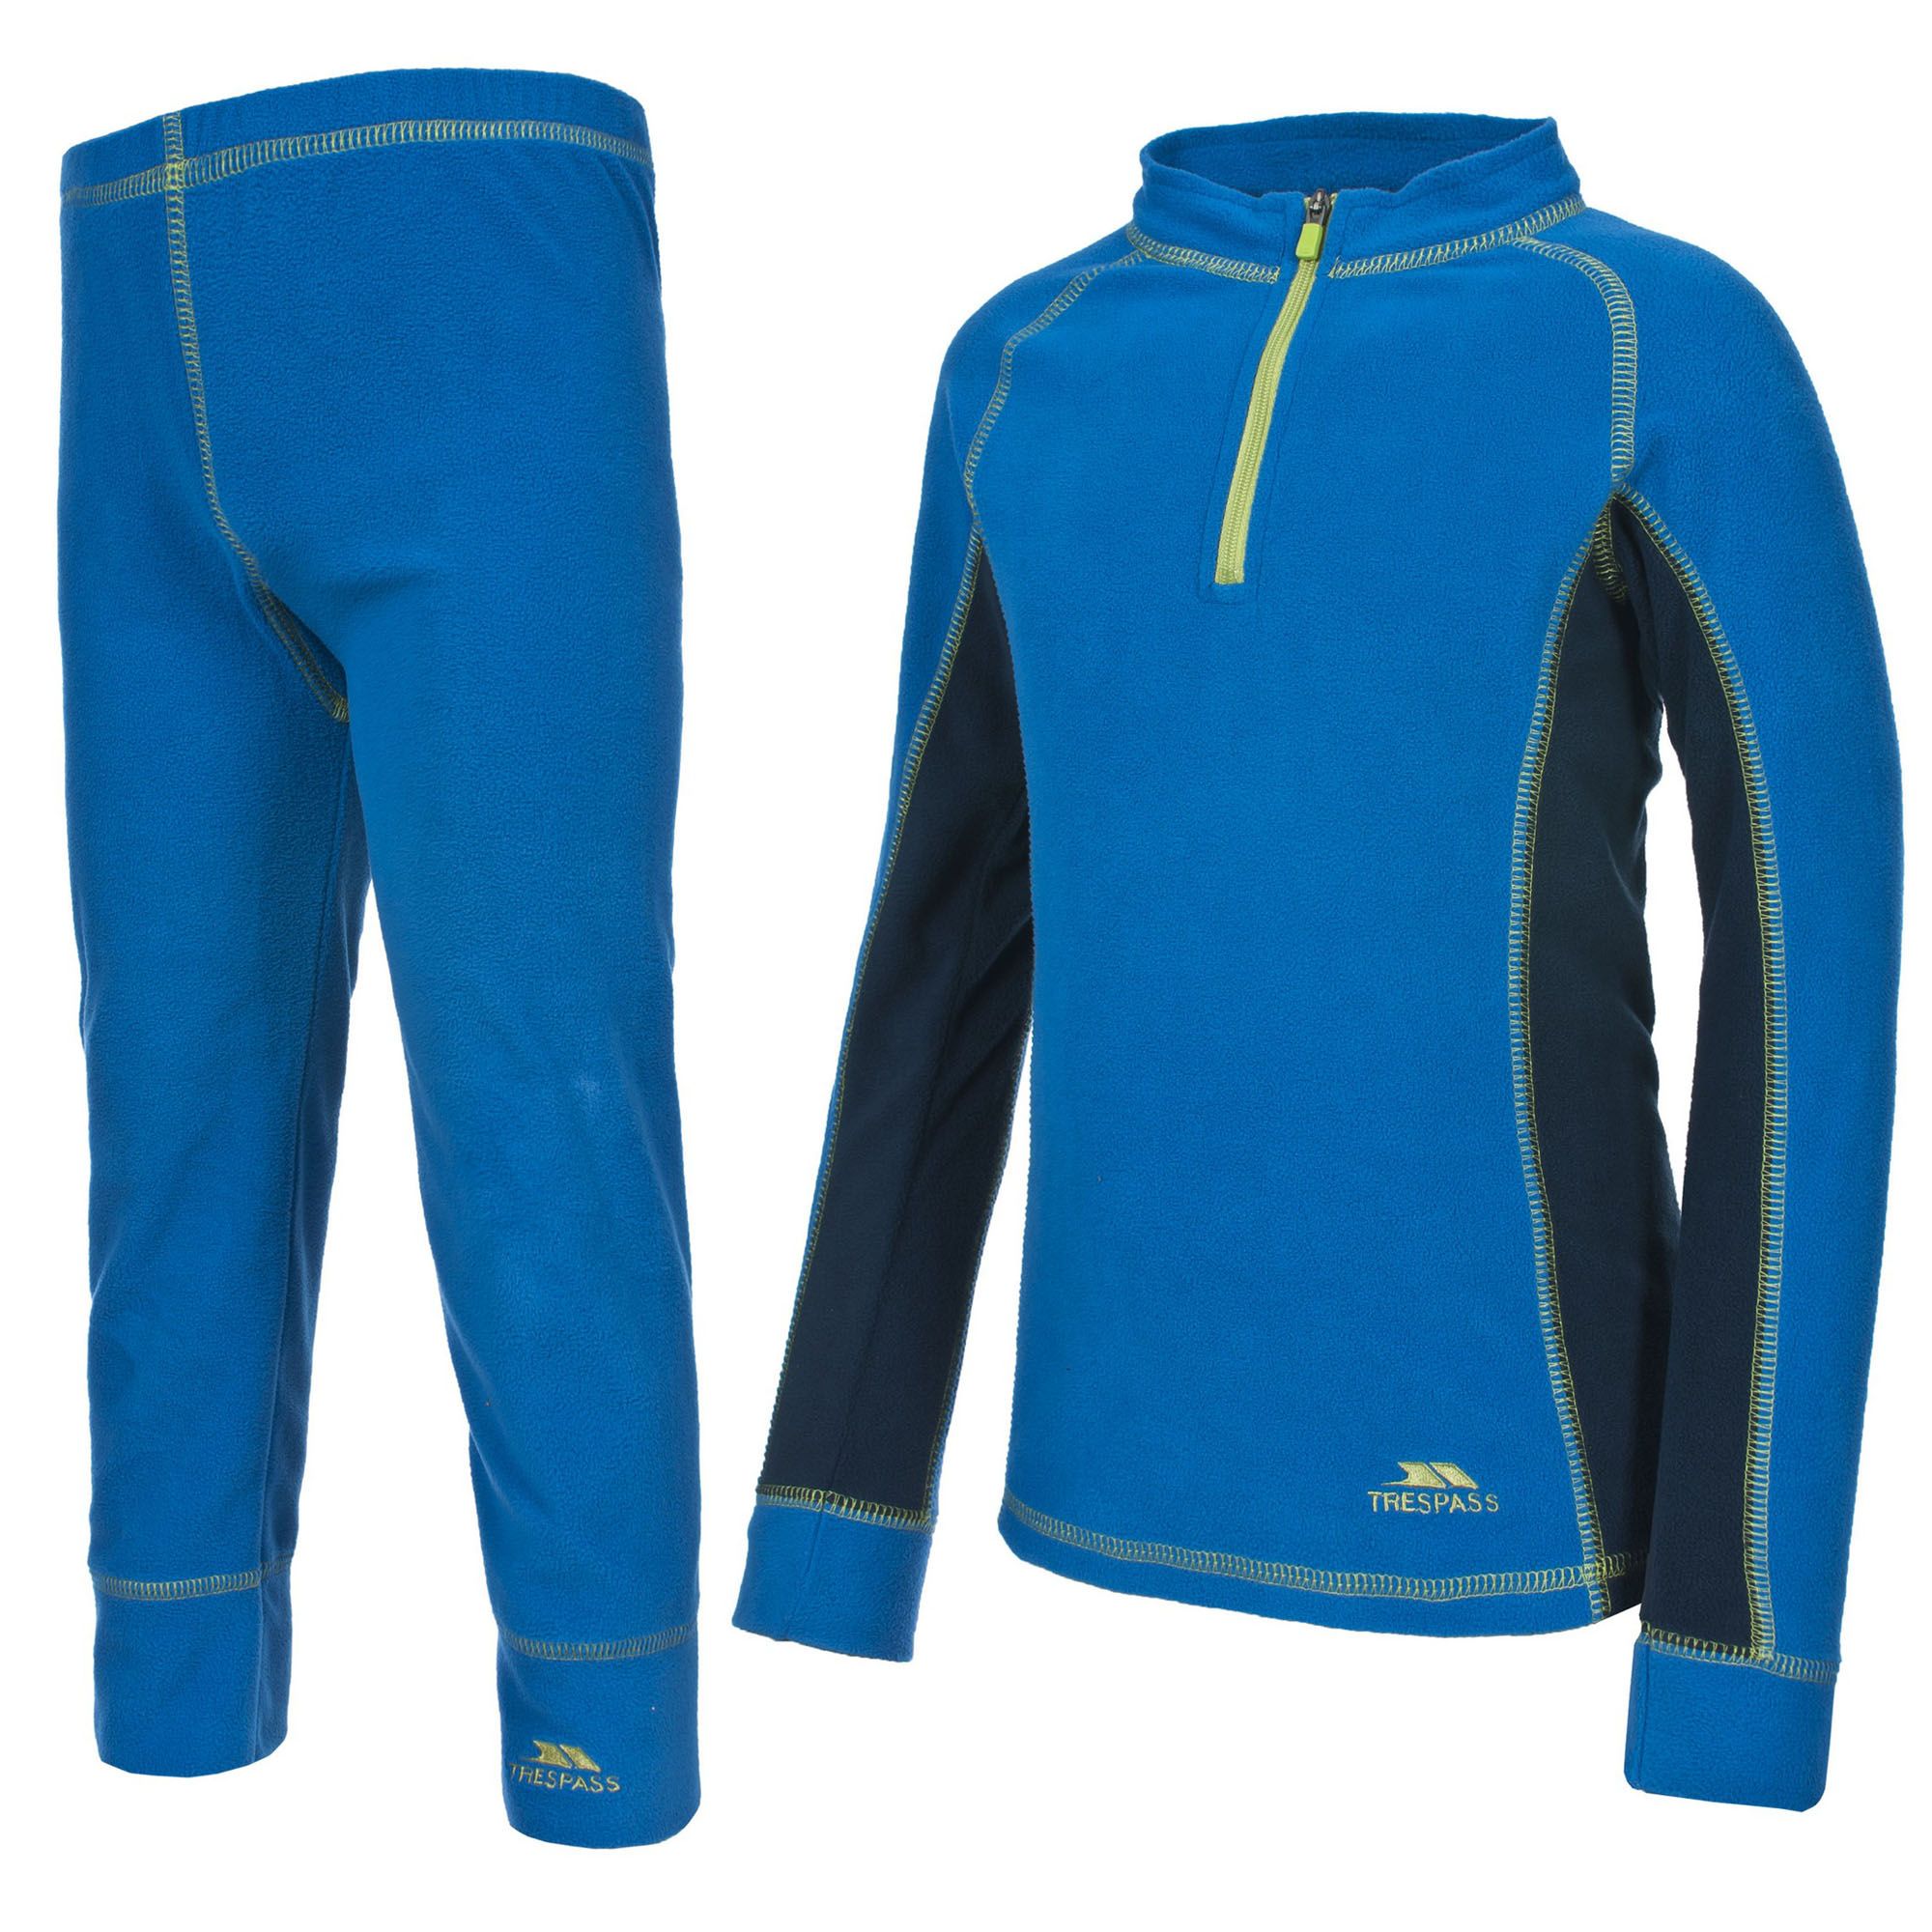 Microfleece base layer set. 160g/m2. Contrast 1/2 zip neck top. Contrast flat seams for comfort. Raglan sleeves. Embroidered logo. Elasticated waist trousers. Branded boxed packaging. 100% Polyester. Machine washable.